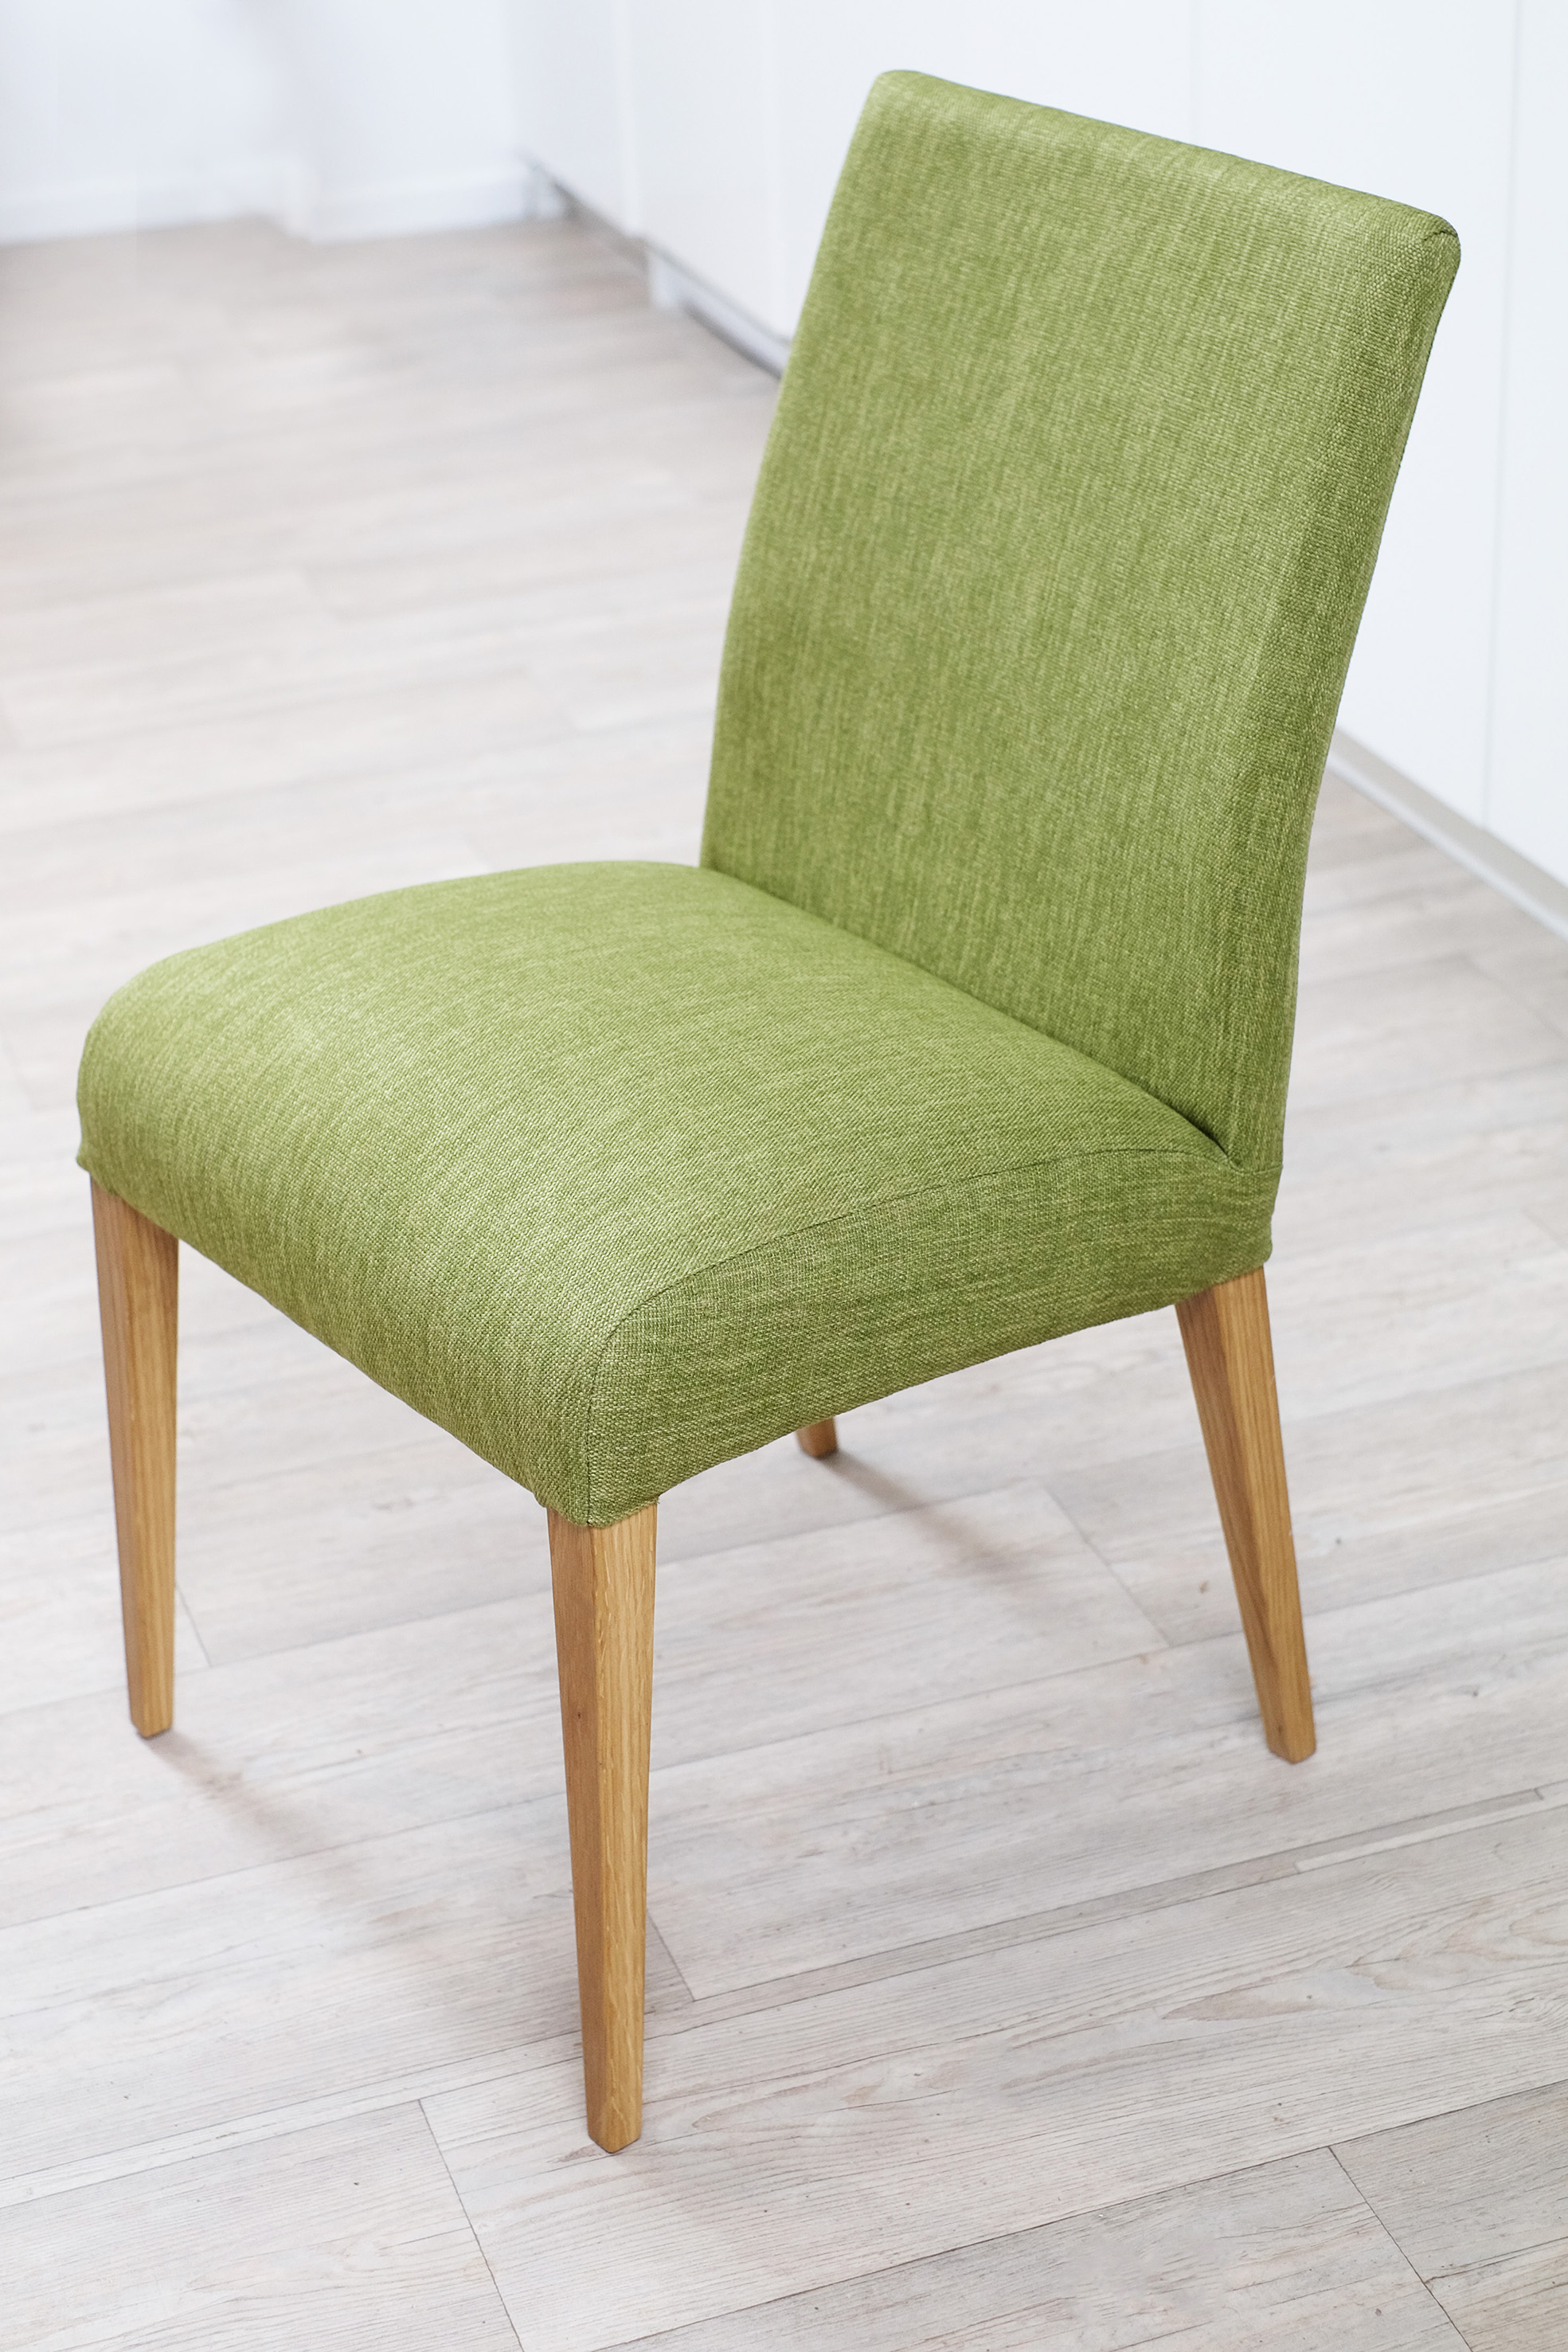 The Most comfortable Dining Chair | Finer FinishersFiner Finishers